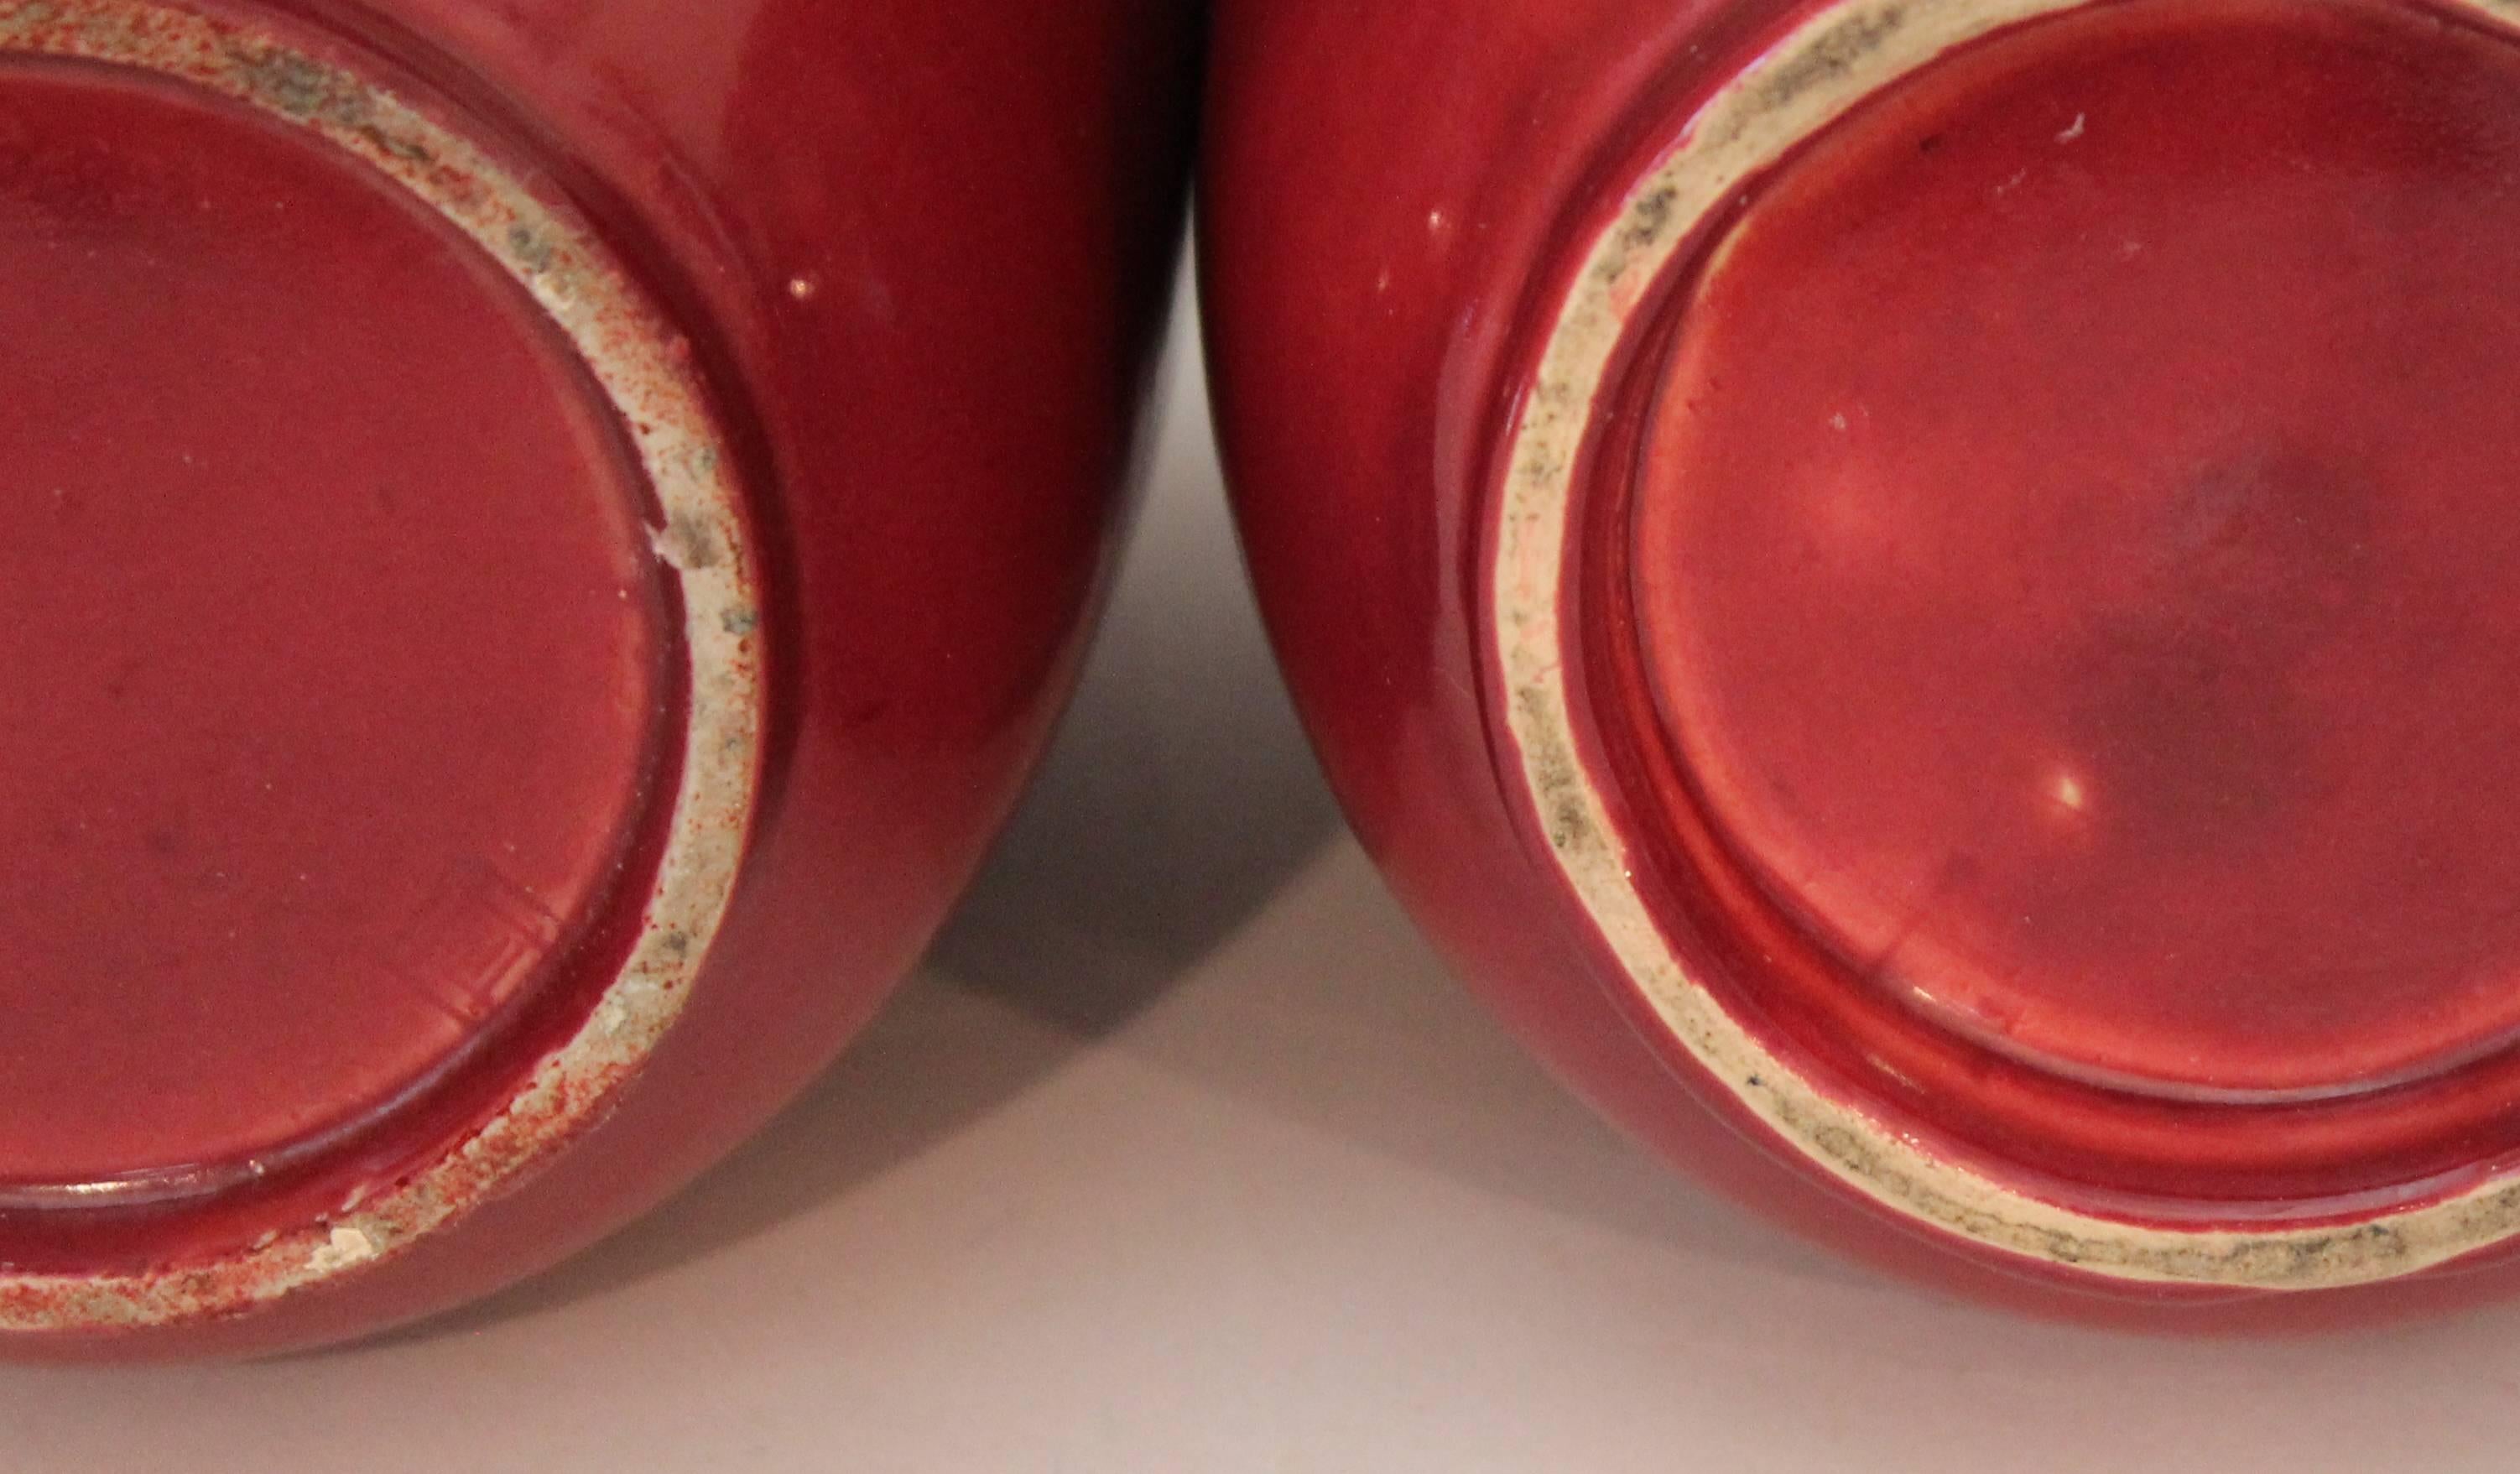 Pair of Old or Antique Awaji Pottery Burgundy Glazed Ginger Jars In Excellent Condition For Sale In Wilton, CT